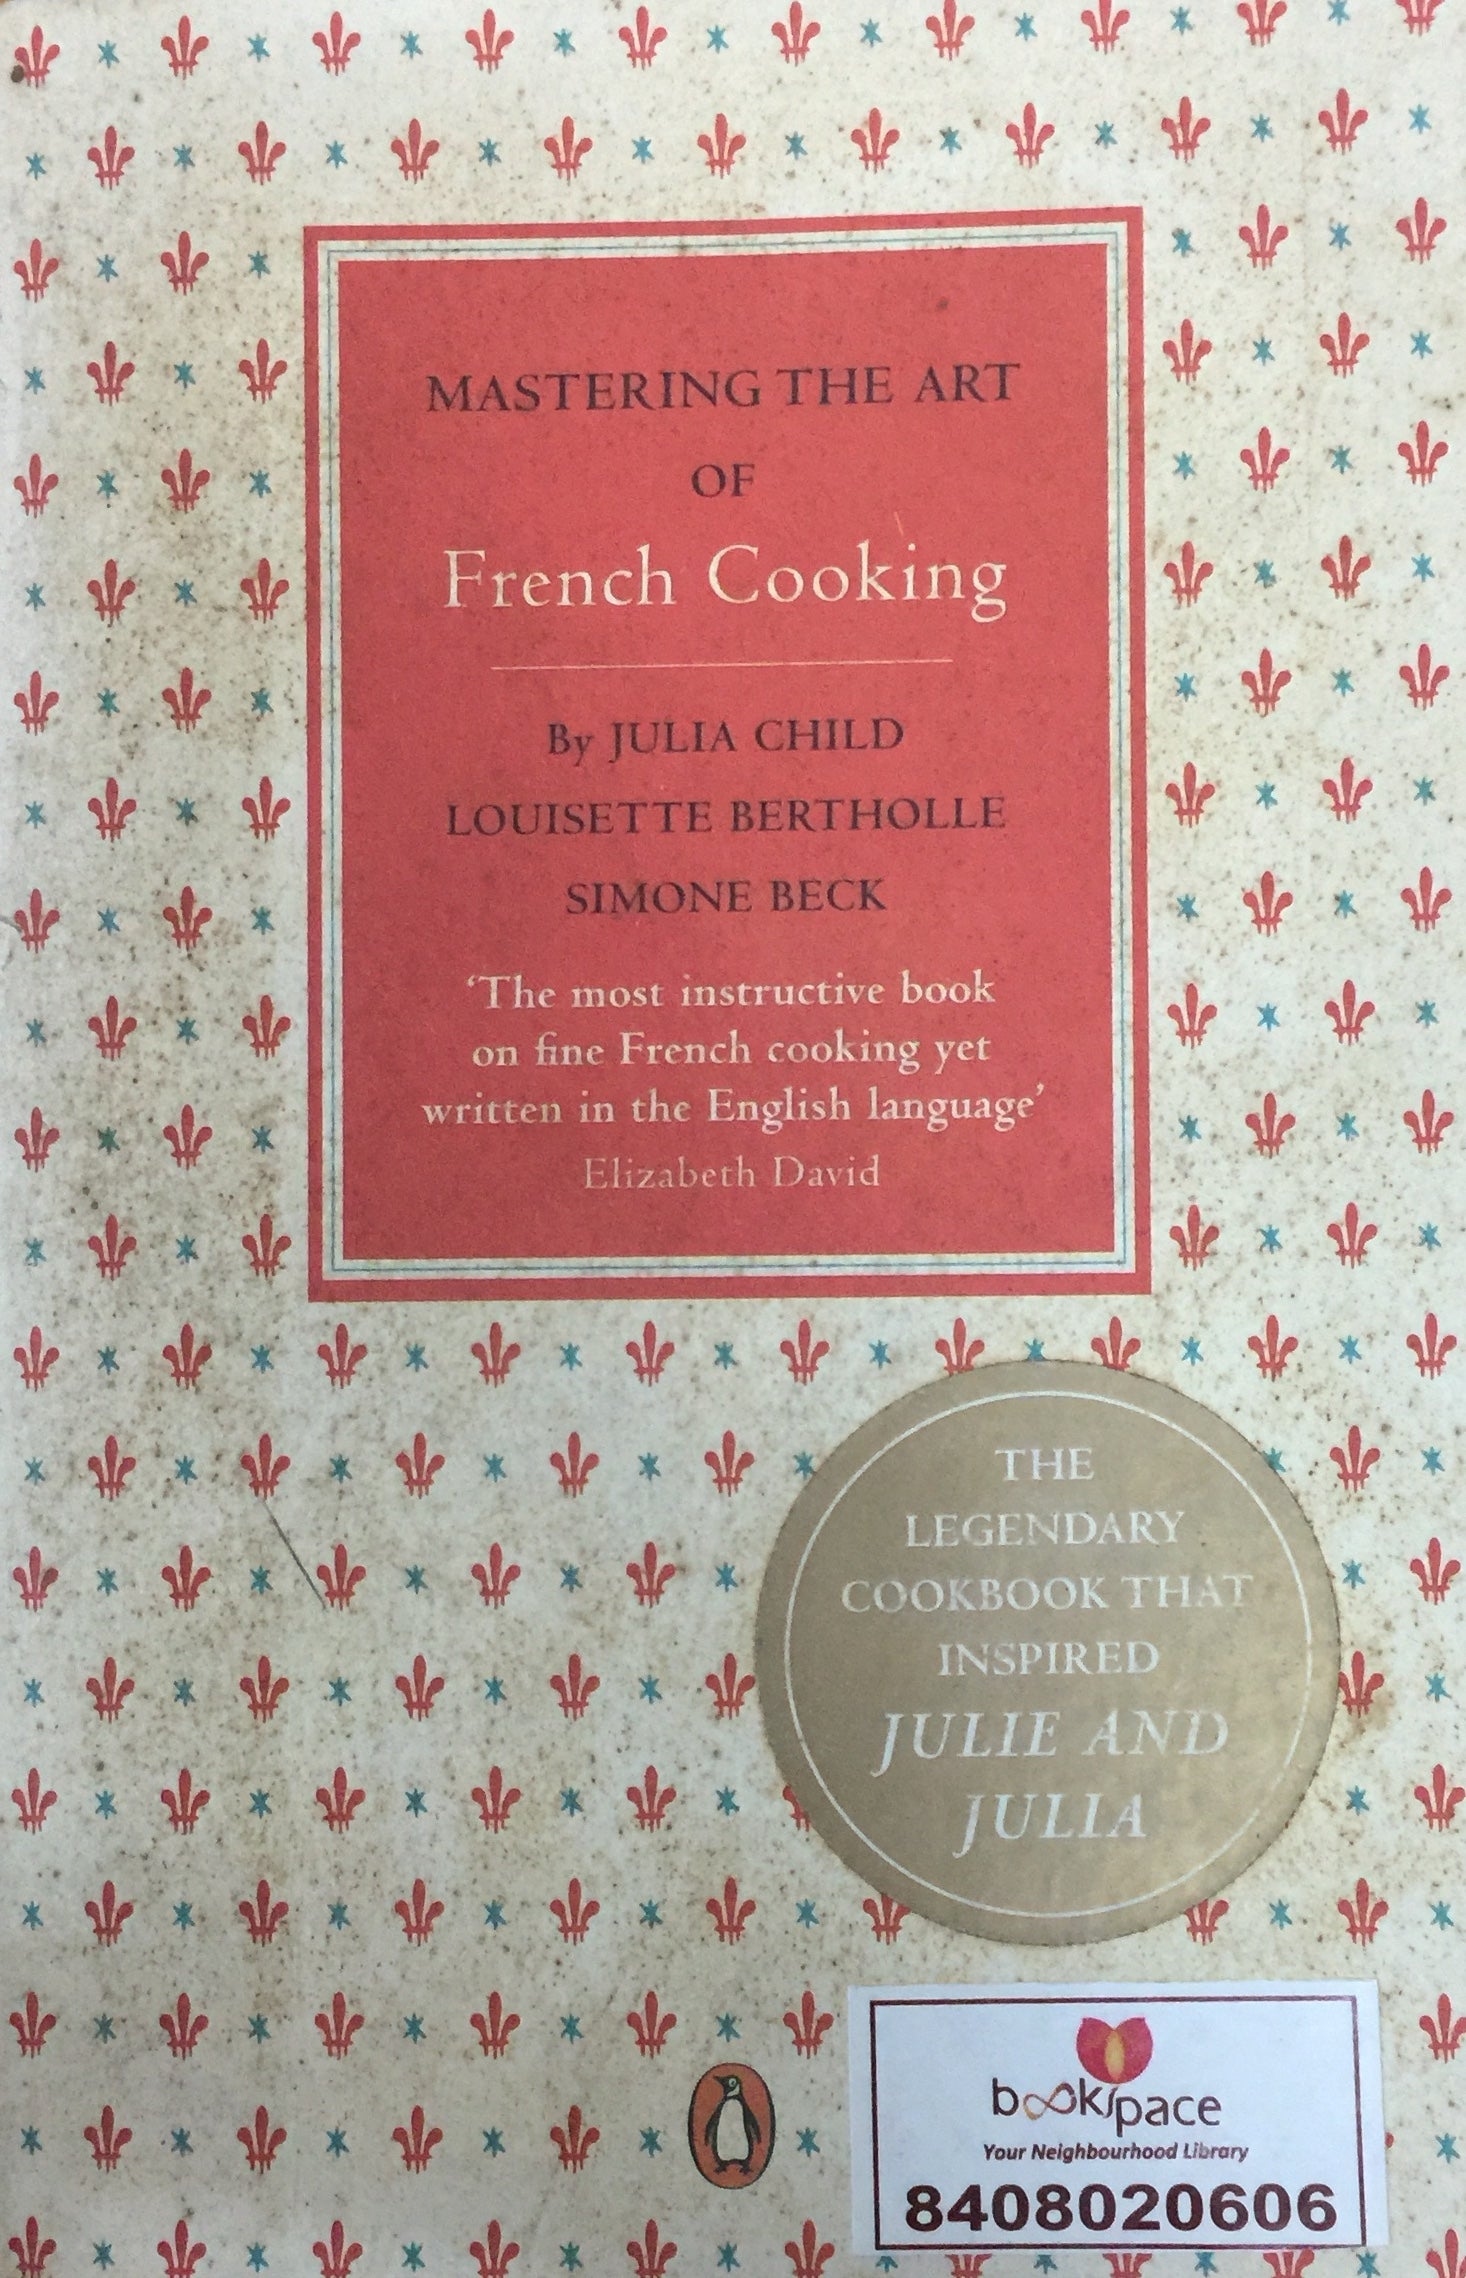 Mastering the Art of French Cooking by Julia Child, Louisette Bertholle, Simone Beck  Half Price Books India Books inspire-bookspace.myshopify.com Half Price Books India